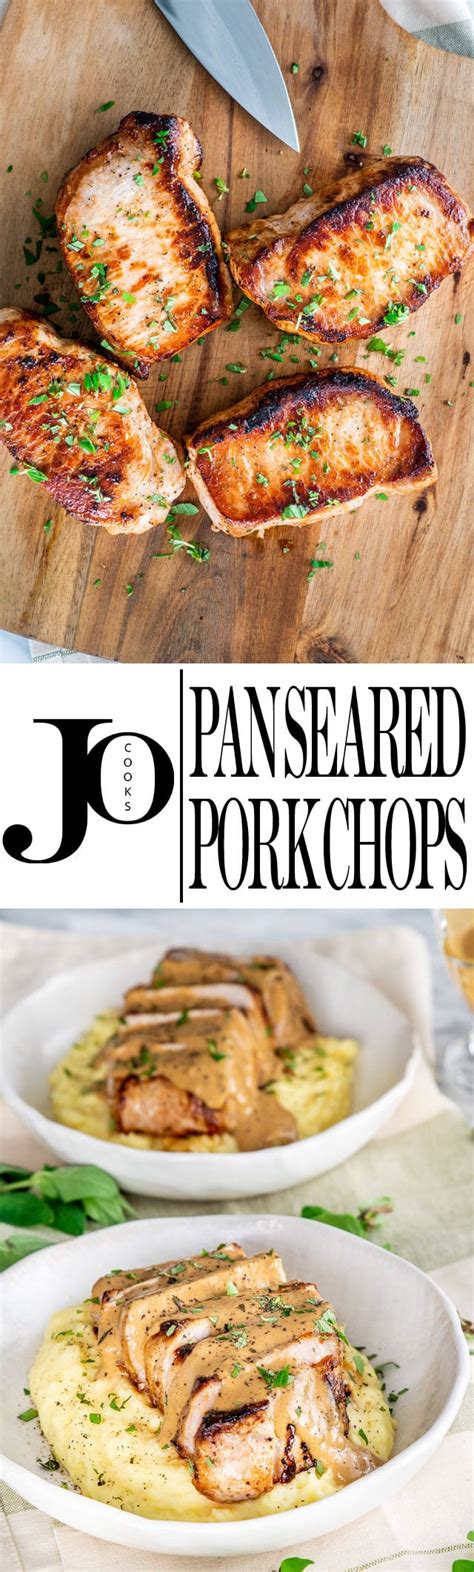 pan-seared-pork-chops-with-gravy-jo-cooks image